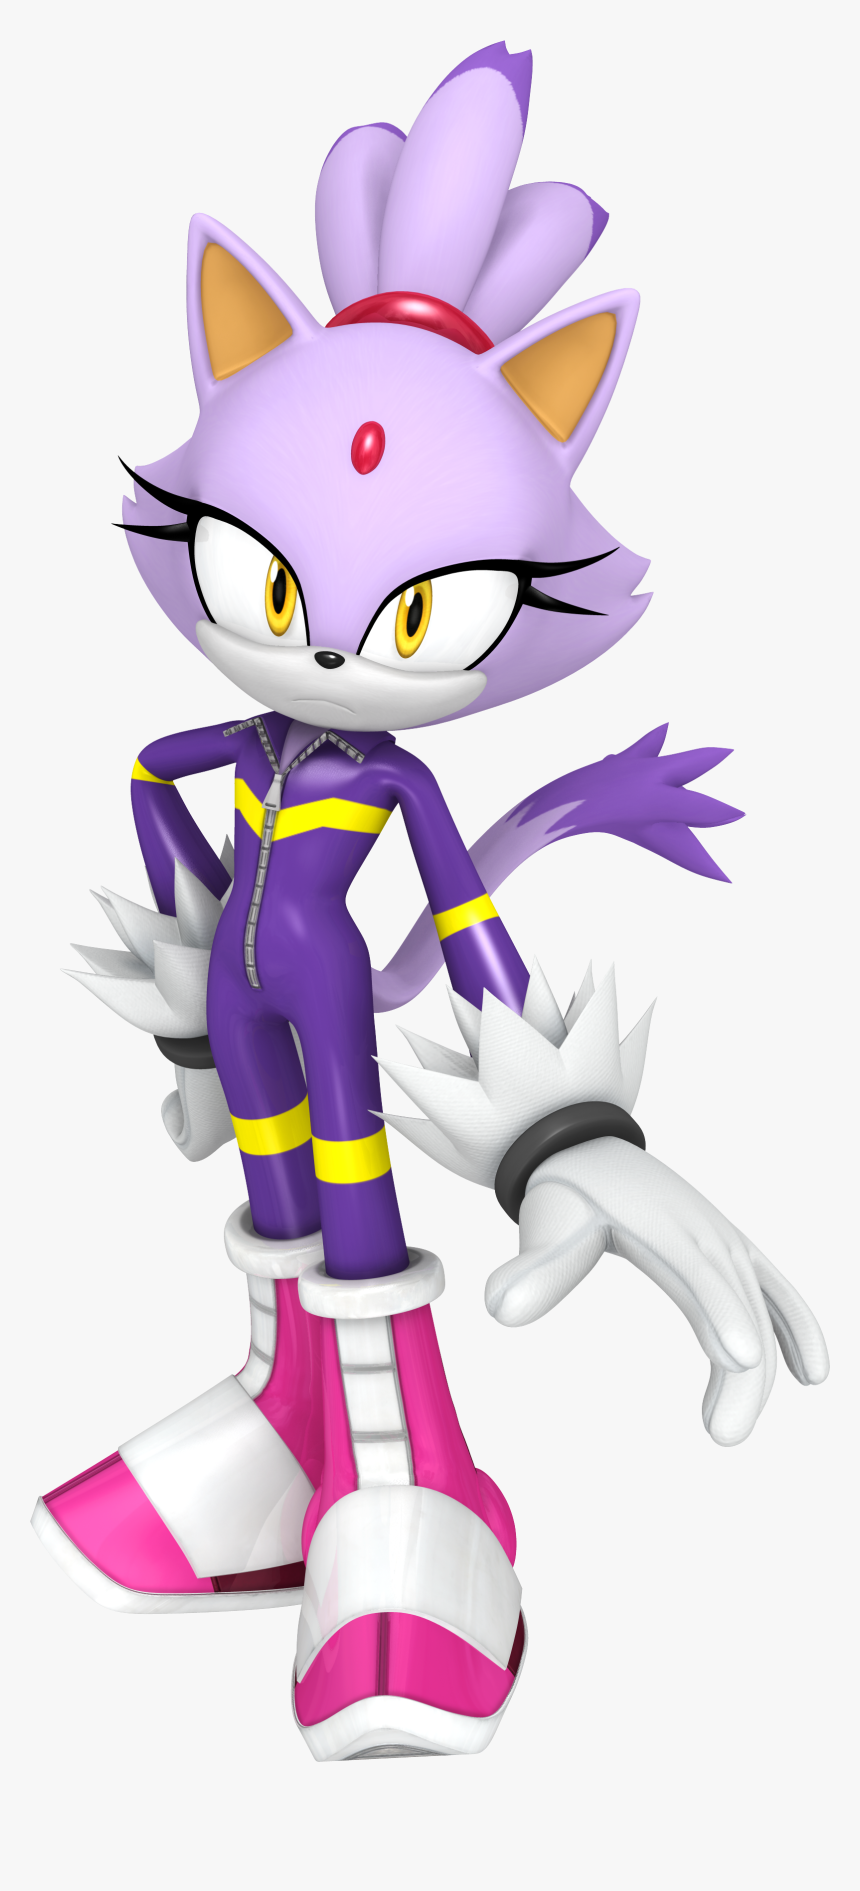 Sonic Free Riders Blaze, HD Png Download, Free Download